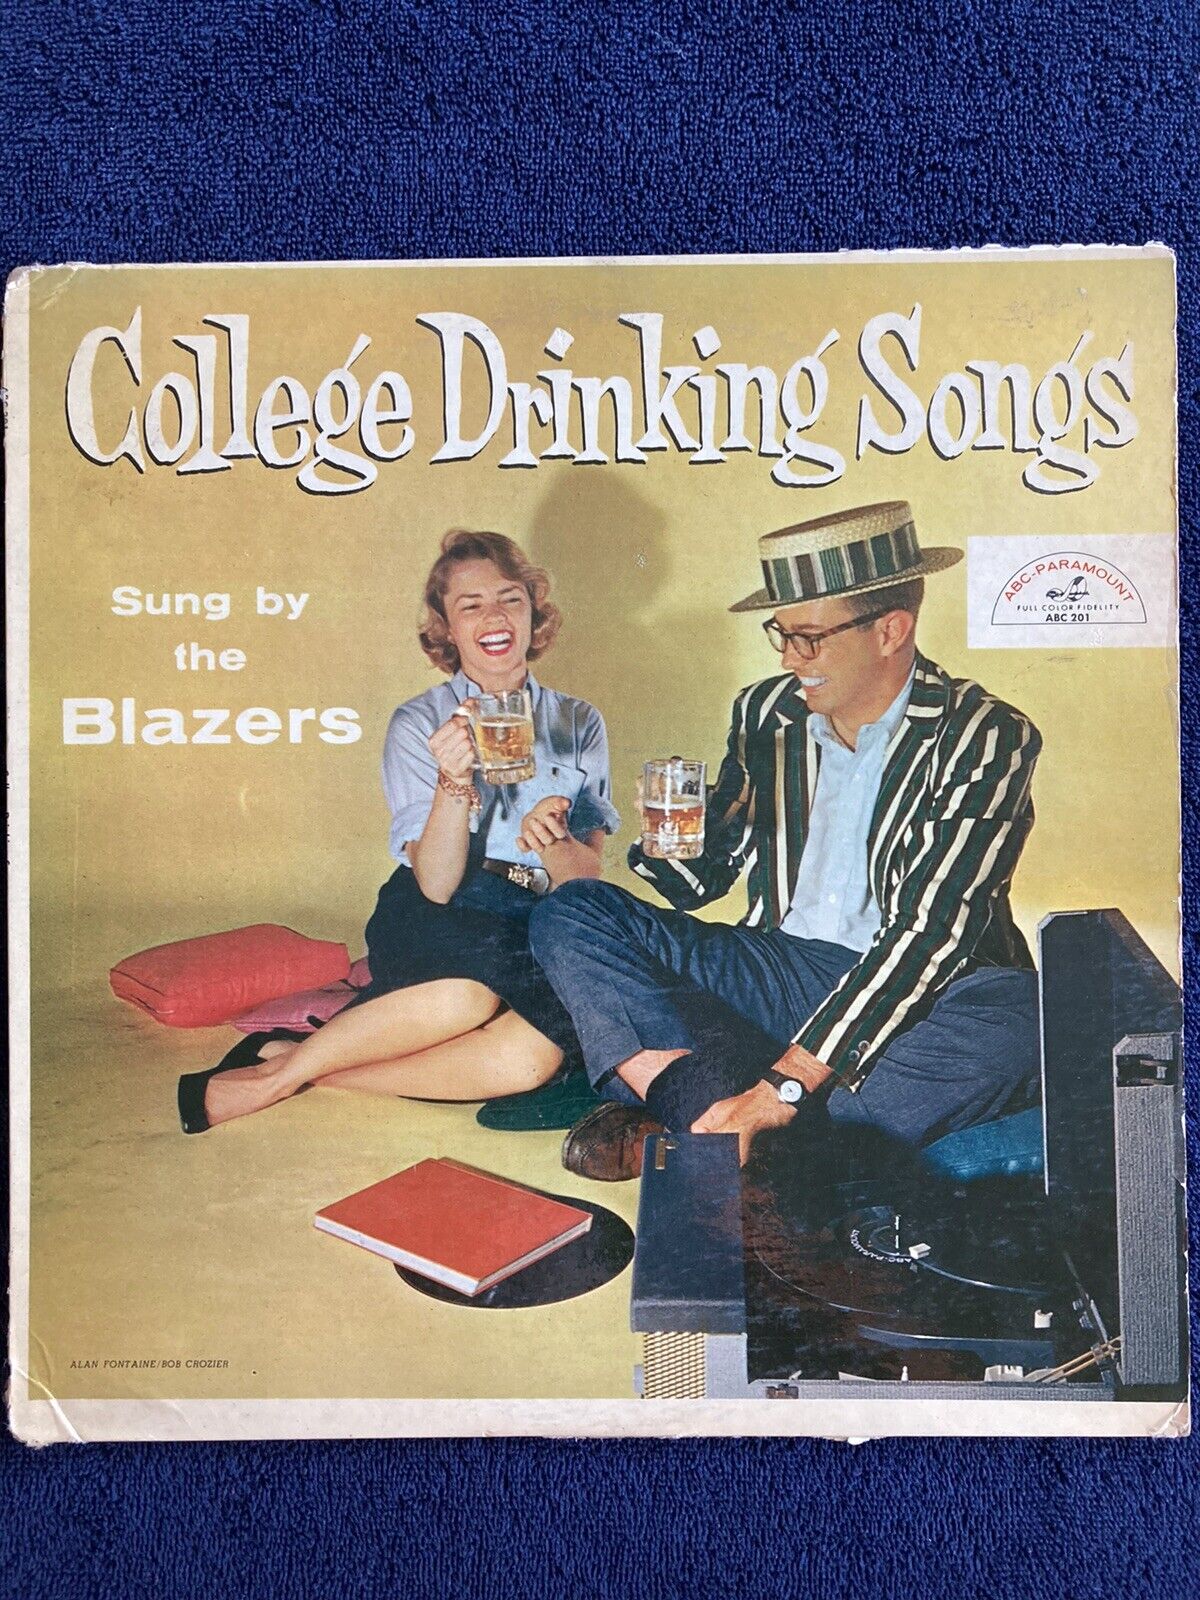 COLLEGE DRINKING SONGS~ The Blazers. 1957  Vinyl LP. Excellent Copy  Fast Ship